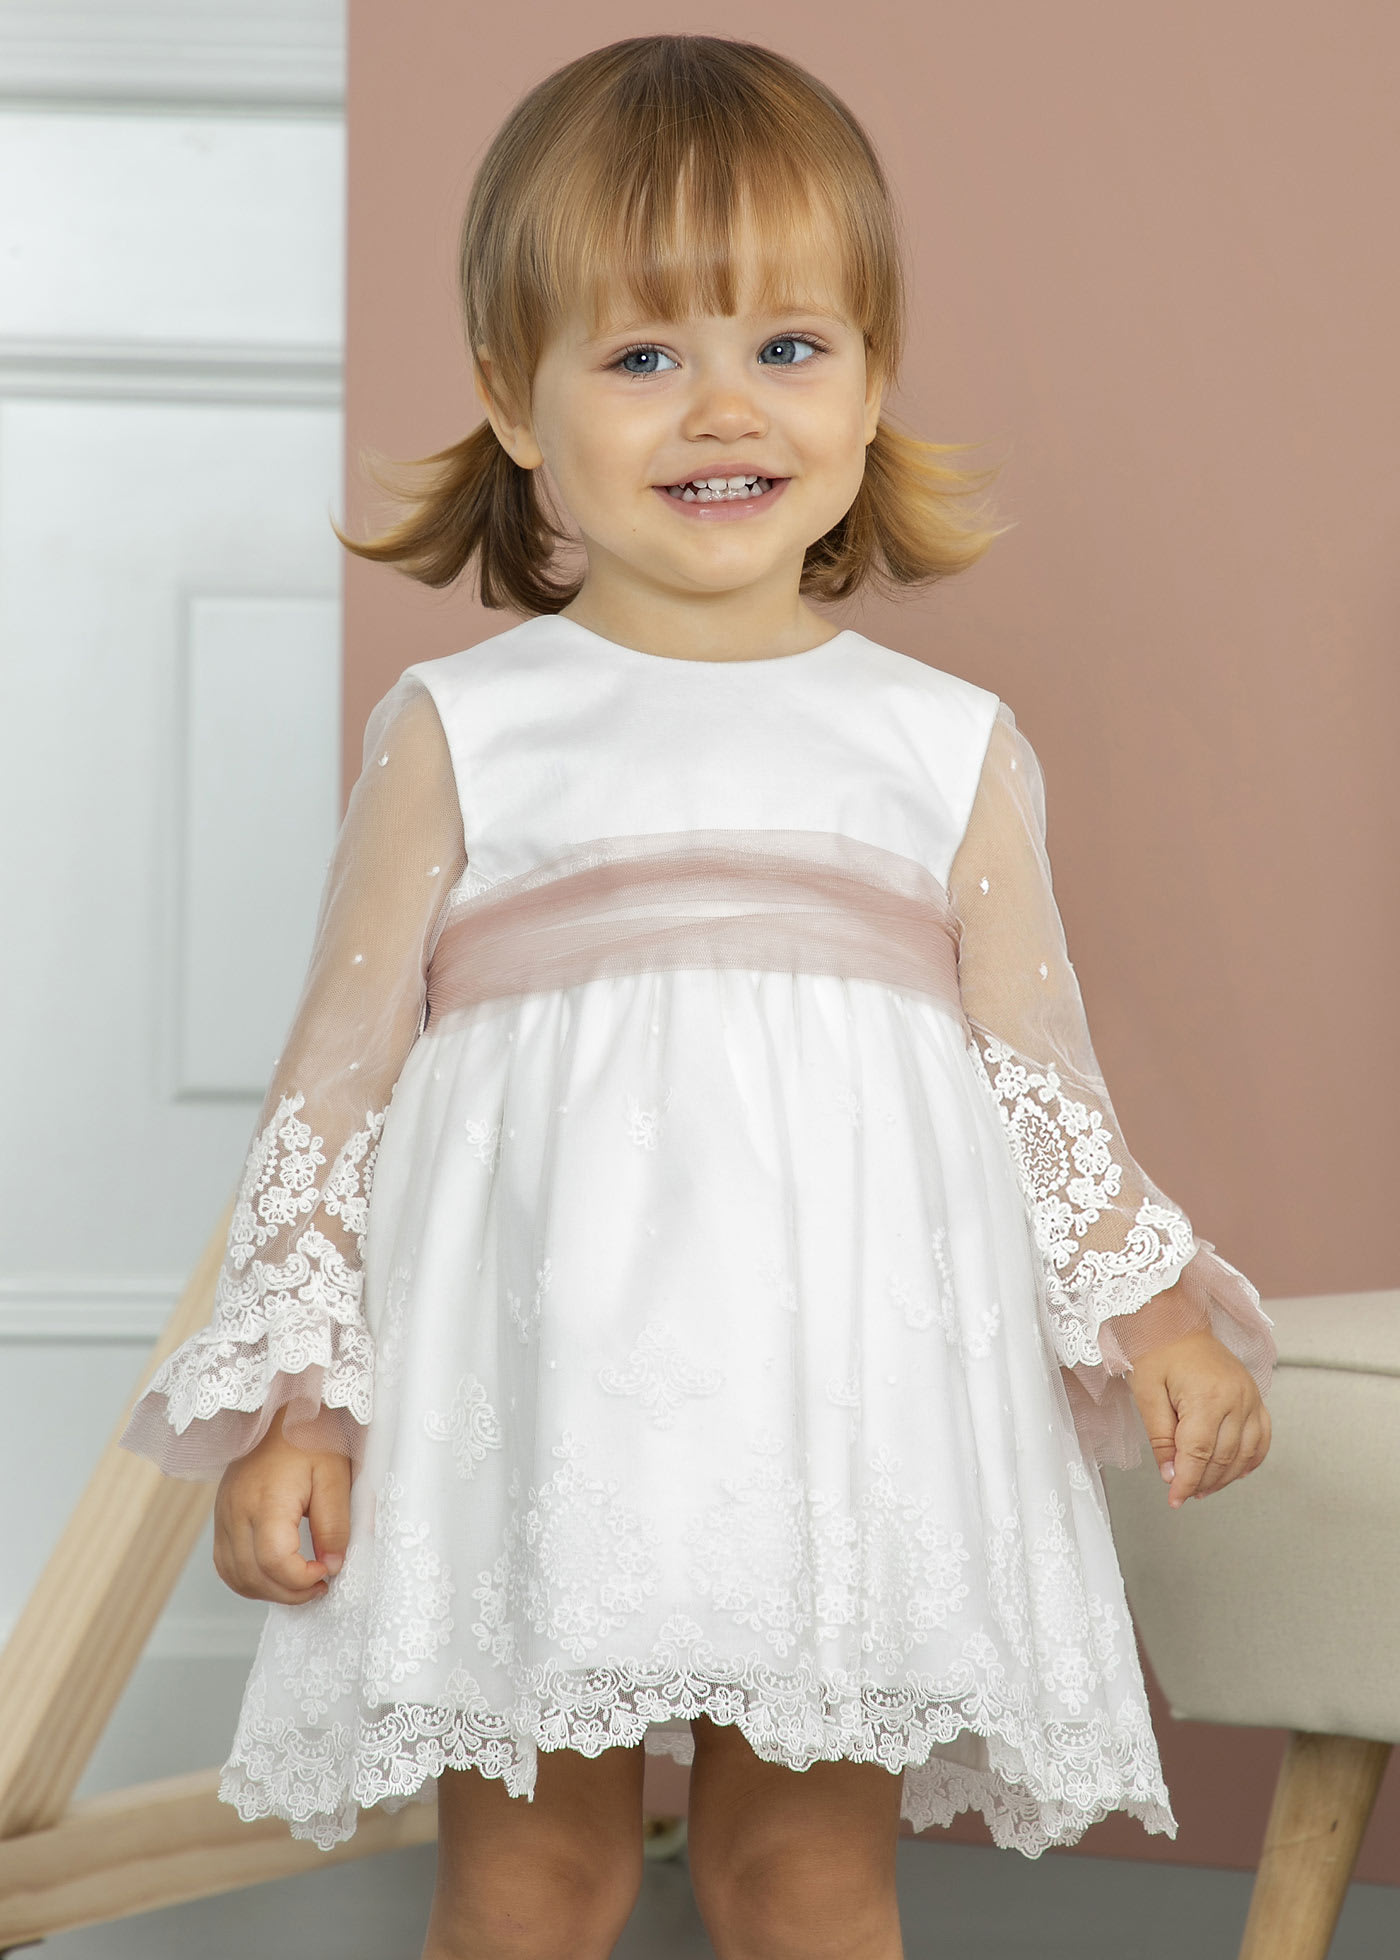 Baby embroidered tulle dress